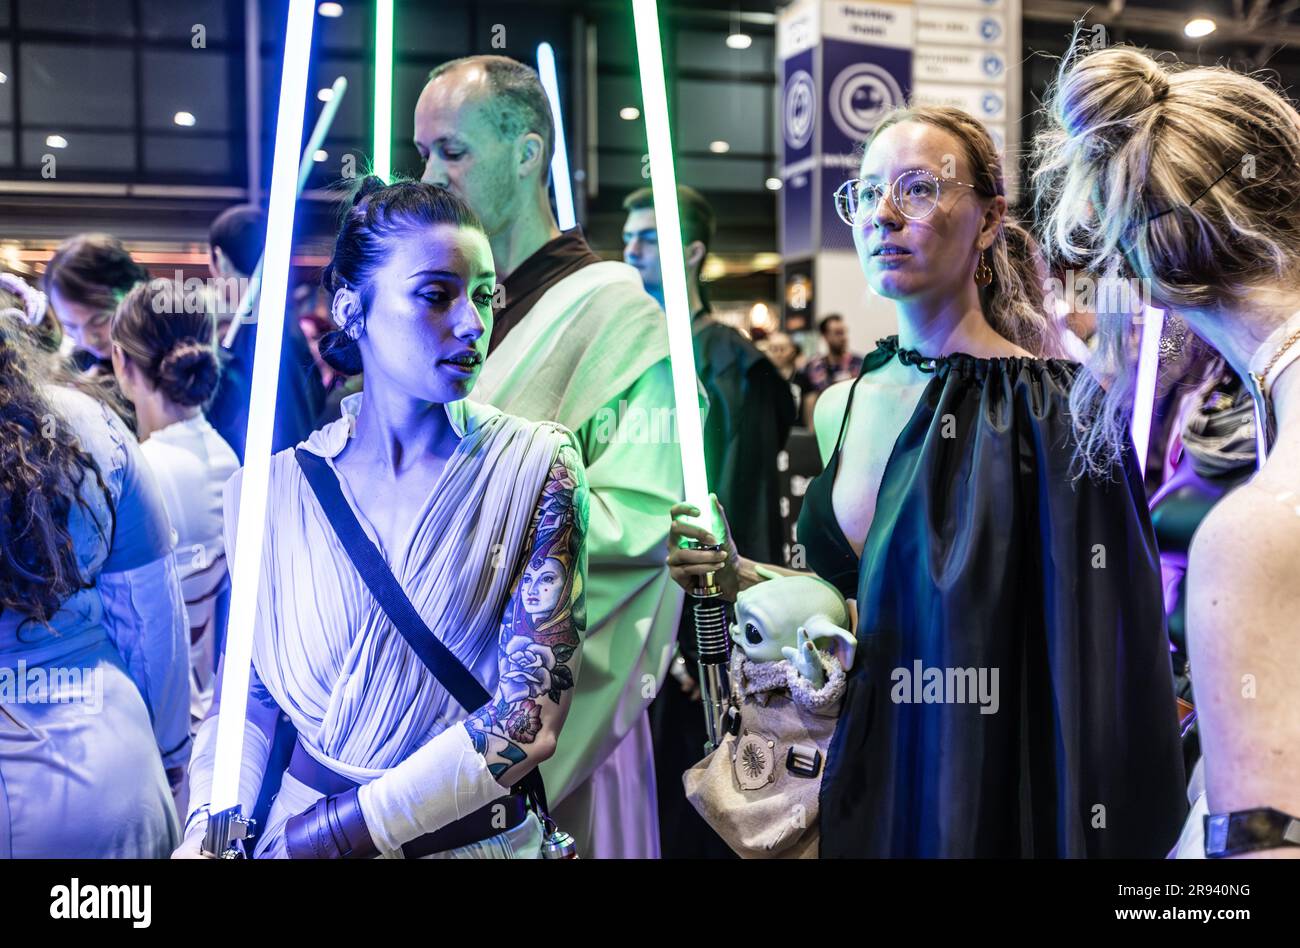 UTRECHT - Visitors in cosplay costume during the Dutch Comic Con in the Jaarbeurs. Dutch Comic Con is an annual event dedicated to comic books, films, series, video games and costumes of pop culture characters. ANP EVA PLEVIER netherlands out - belgium out Stock Photo